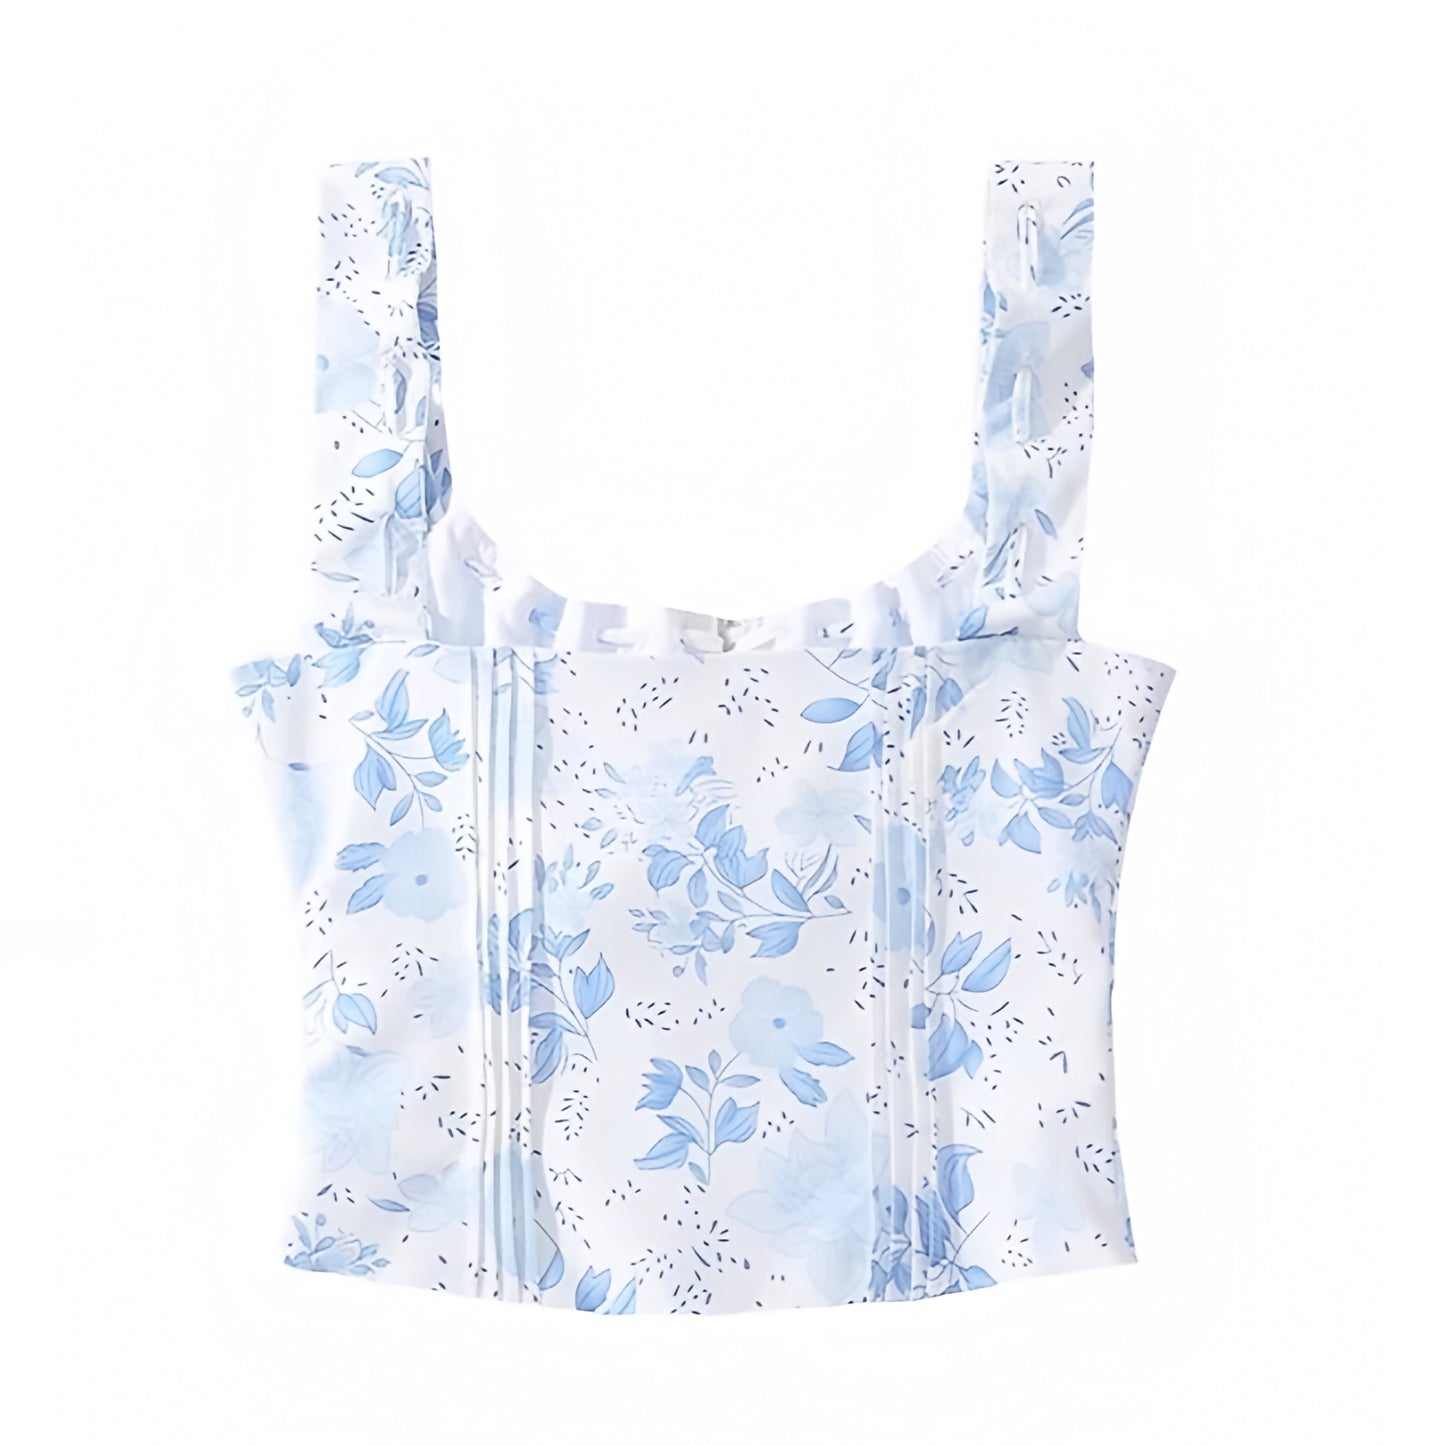 floral-print-light-blue-and-white-multi-color-flower-patterned-slim-fit-bodycon-corset-bustier-bow-string-tie-spaghetti-strap-sleeveless-square-neckline-backless-open-back-full-length-hip-crop-camisole-tank-top-blouse-shirt-women-ladies-teens-tweens-chic-trendy-spring-2024-summer-elgeant-casual-feminine-preppy-style-coquette-coastal-granddaughter-grandmillennial-beach-wear-vacation-tops-altard-state-zara-loveshackfancy-aritzia-revolve-princess-polly-urban-outfitters-dupe